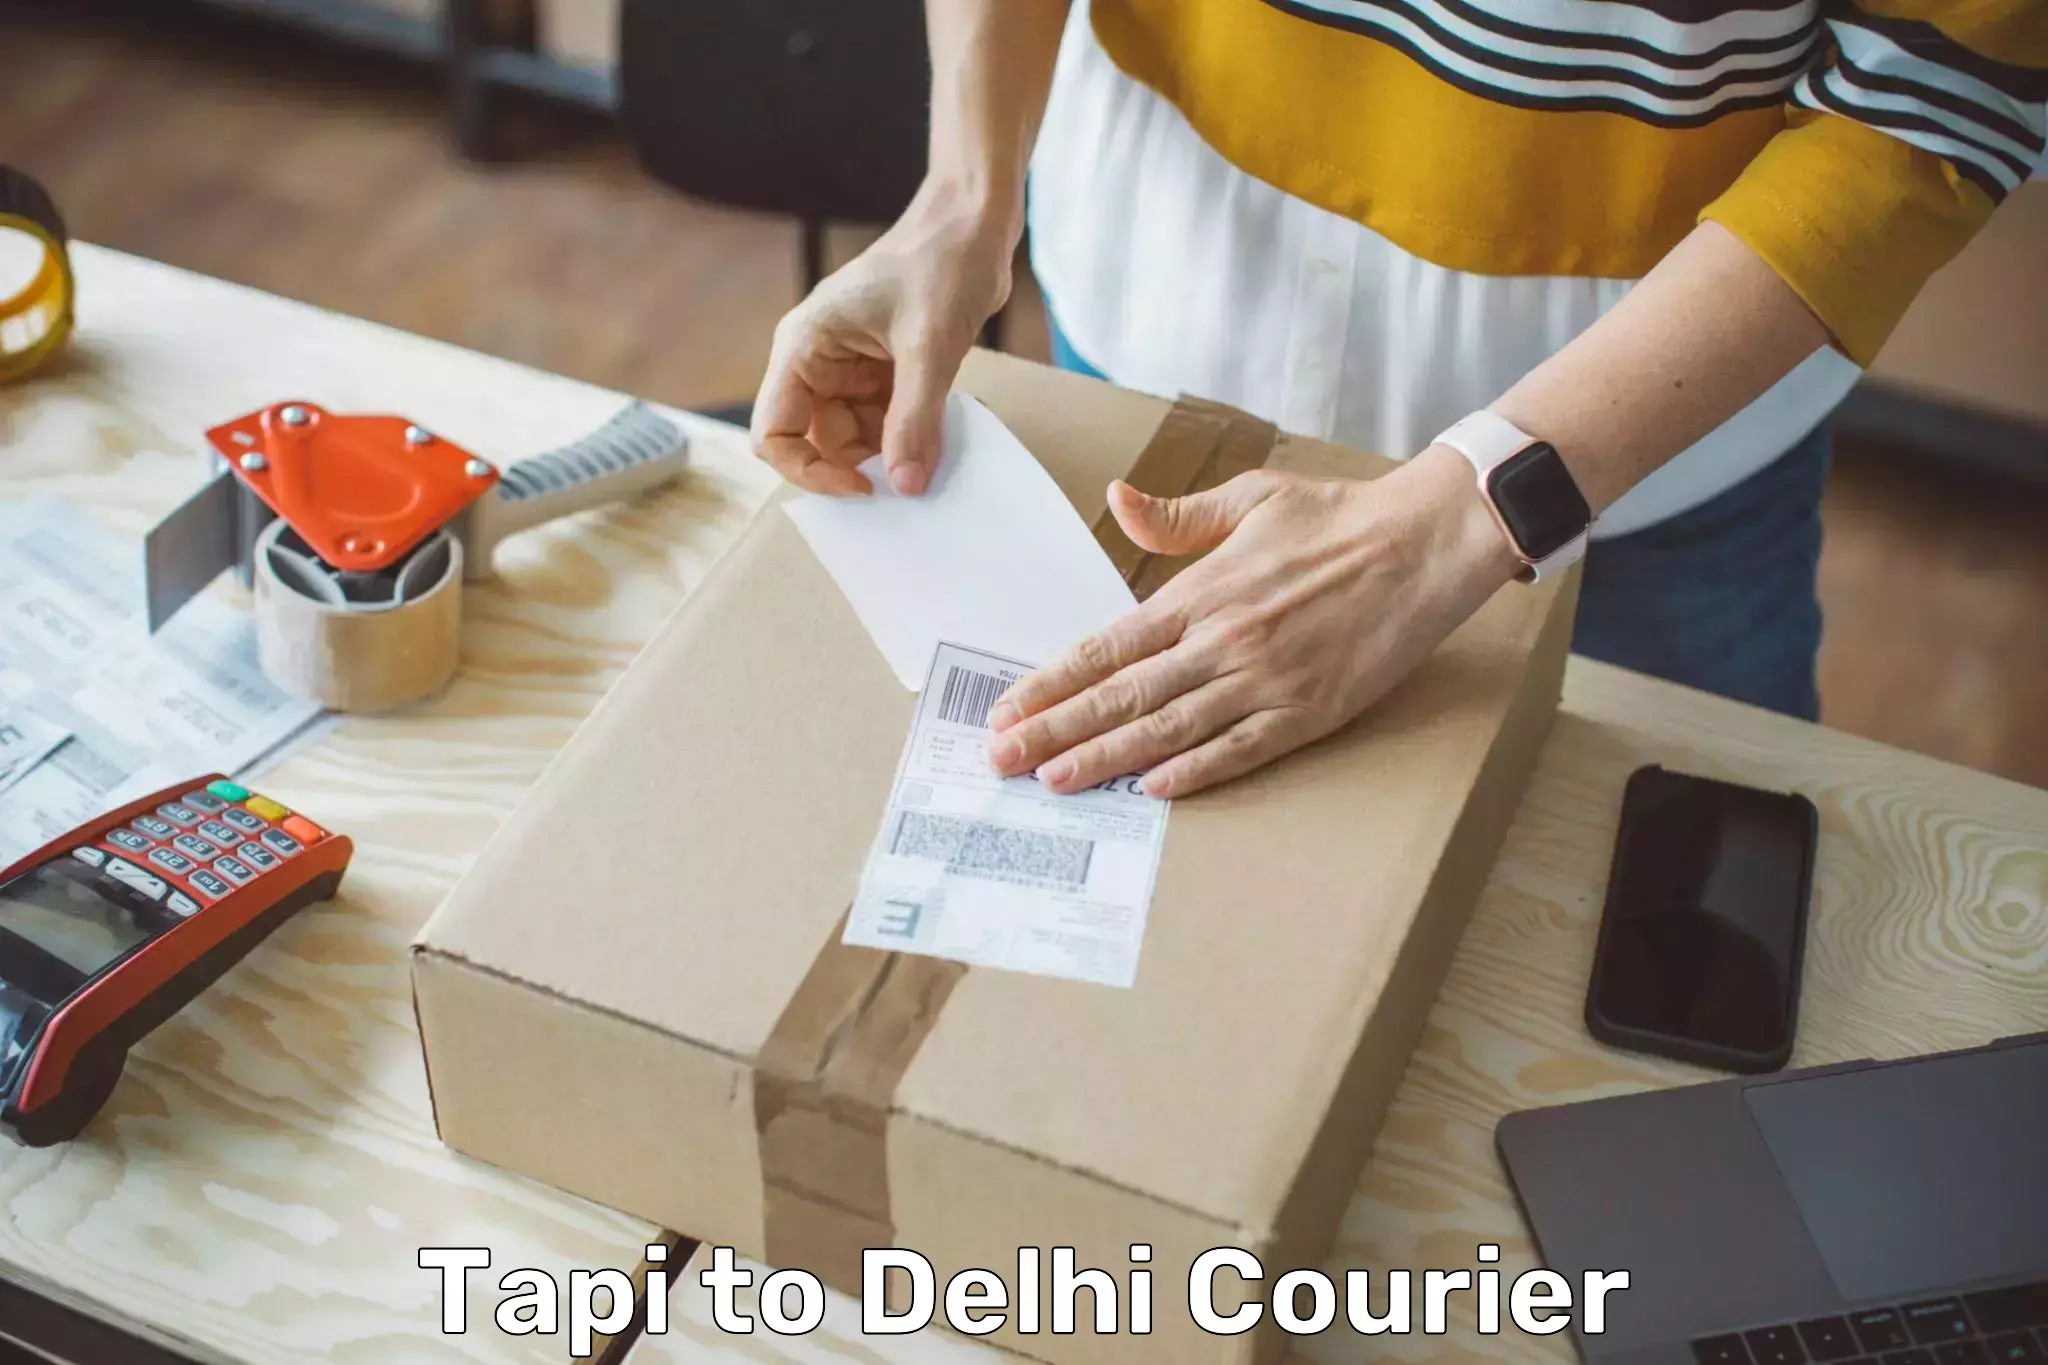 24-hour delivery options Tapi to Delhi